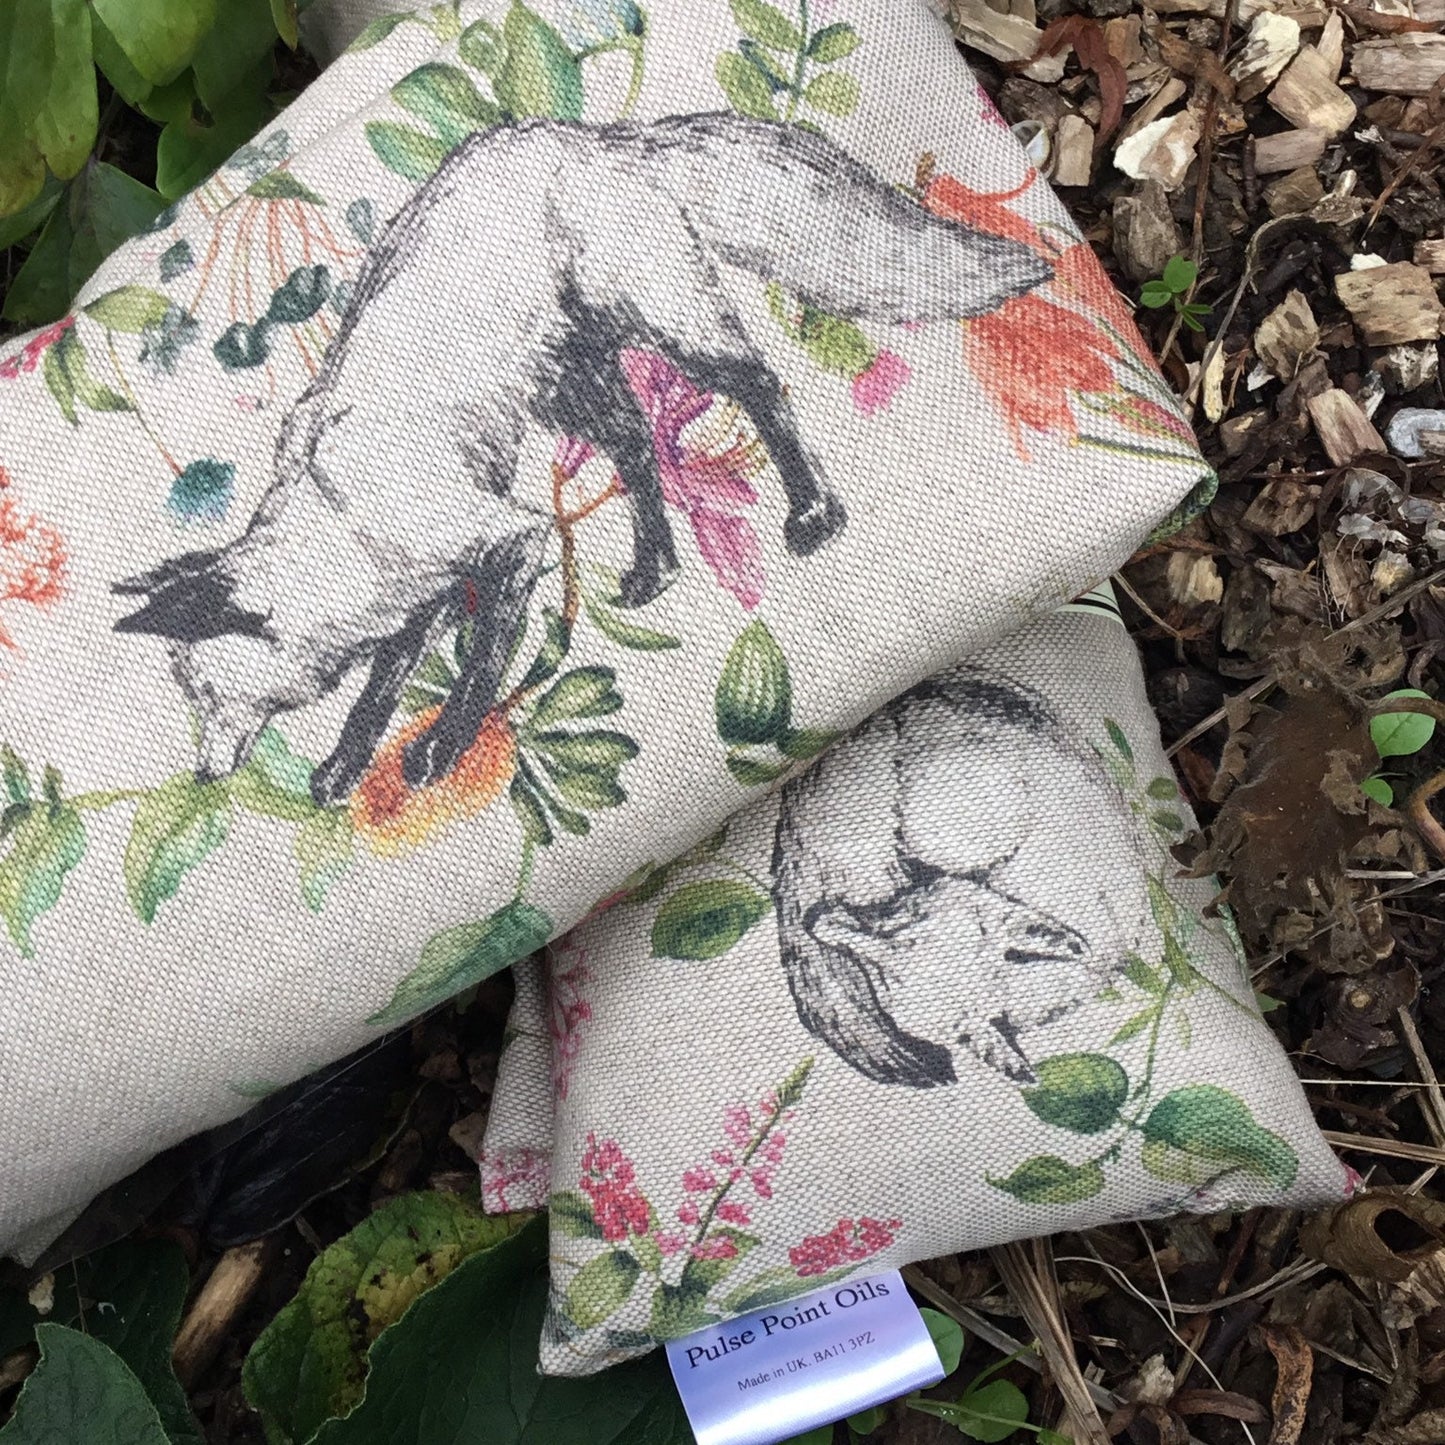 lavender wheat bag. Urban garden fox print, for soothing aches and pains.